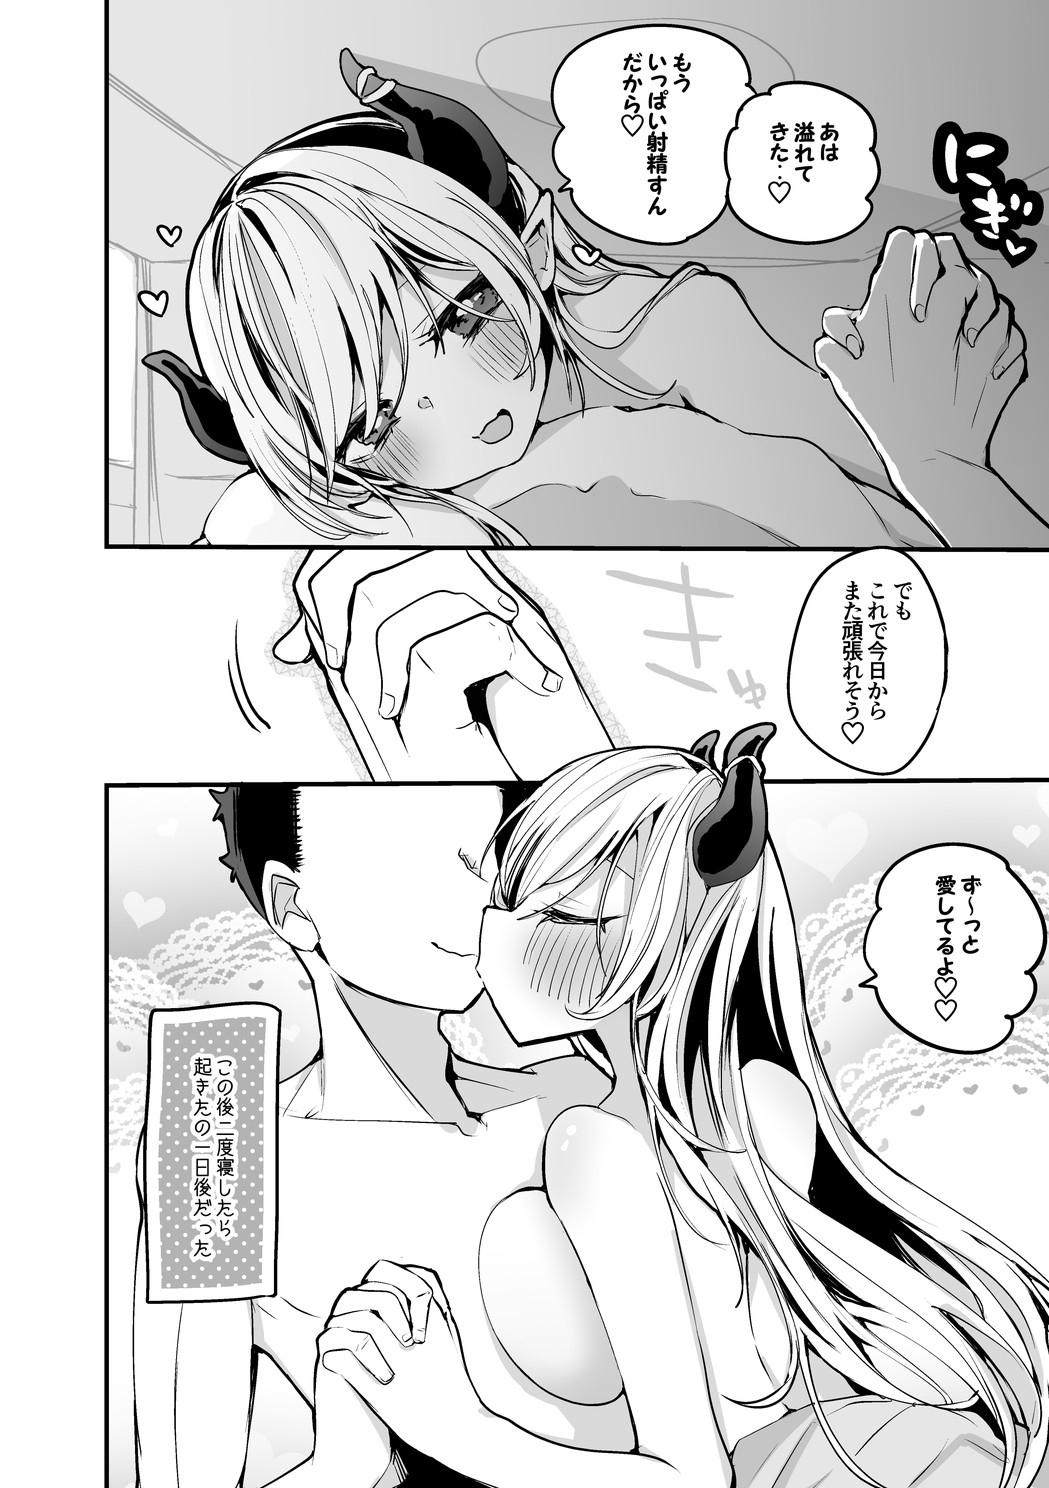 Gangbang ちょこ先生は久々に編 - Hololive Eurobabe - Page 7